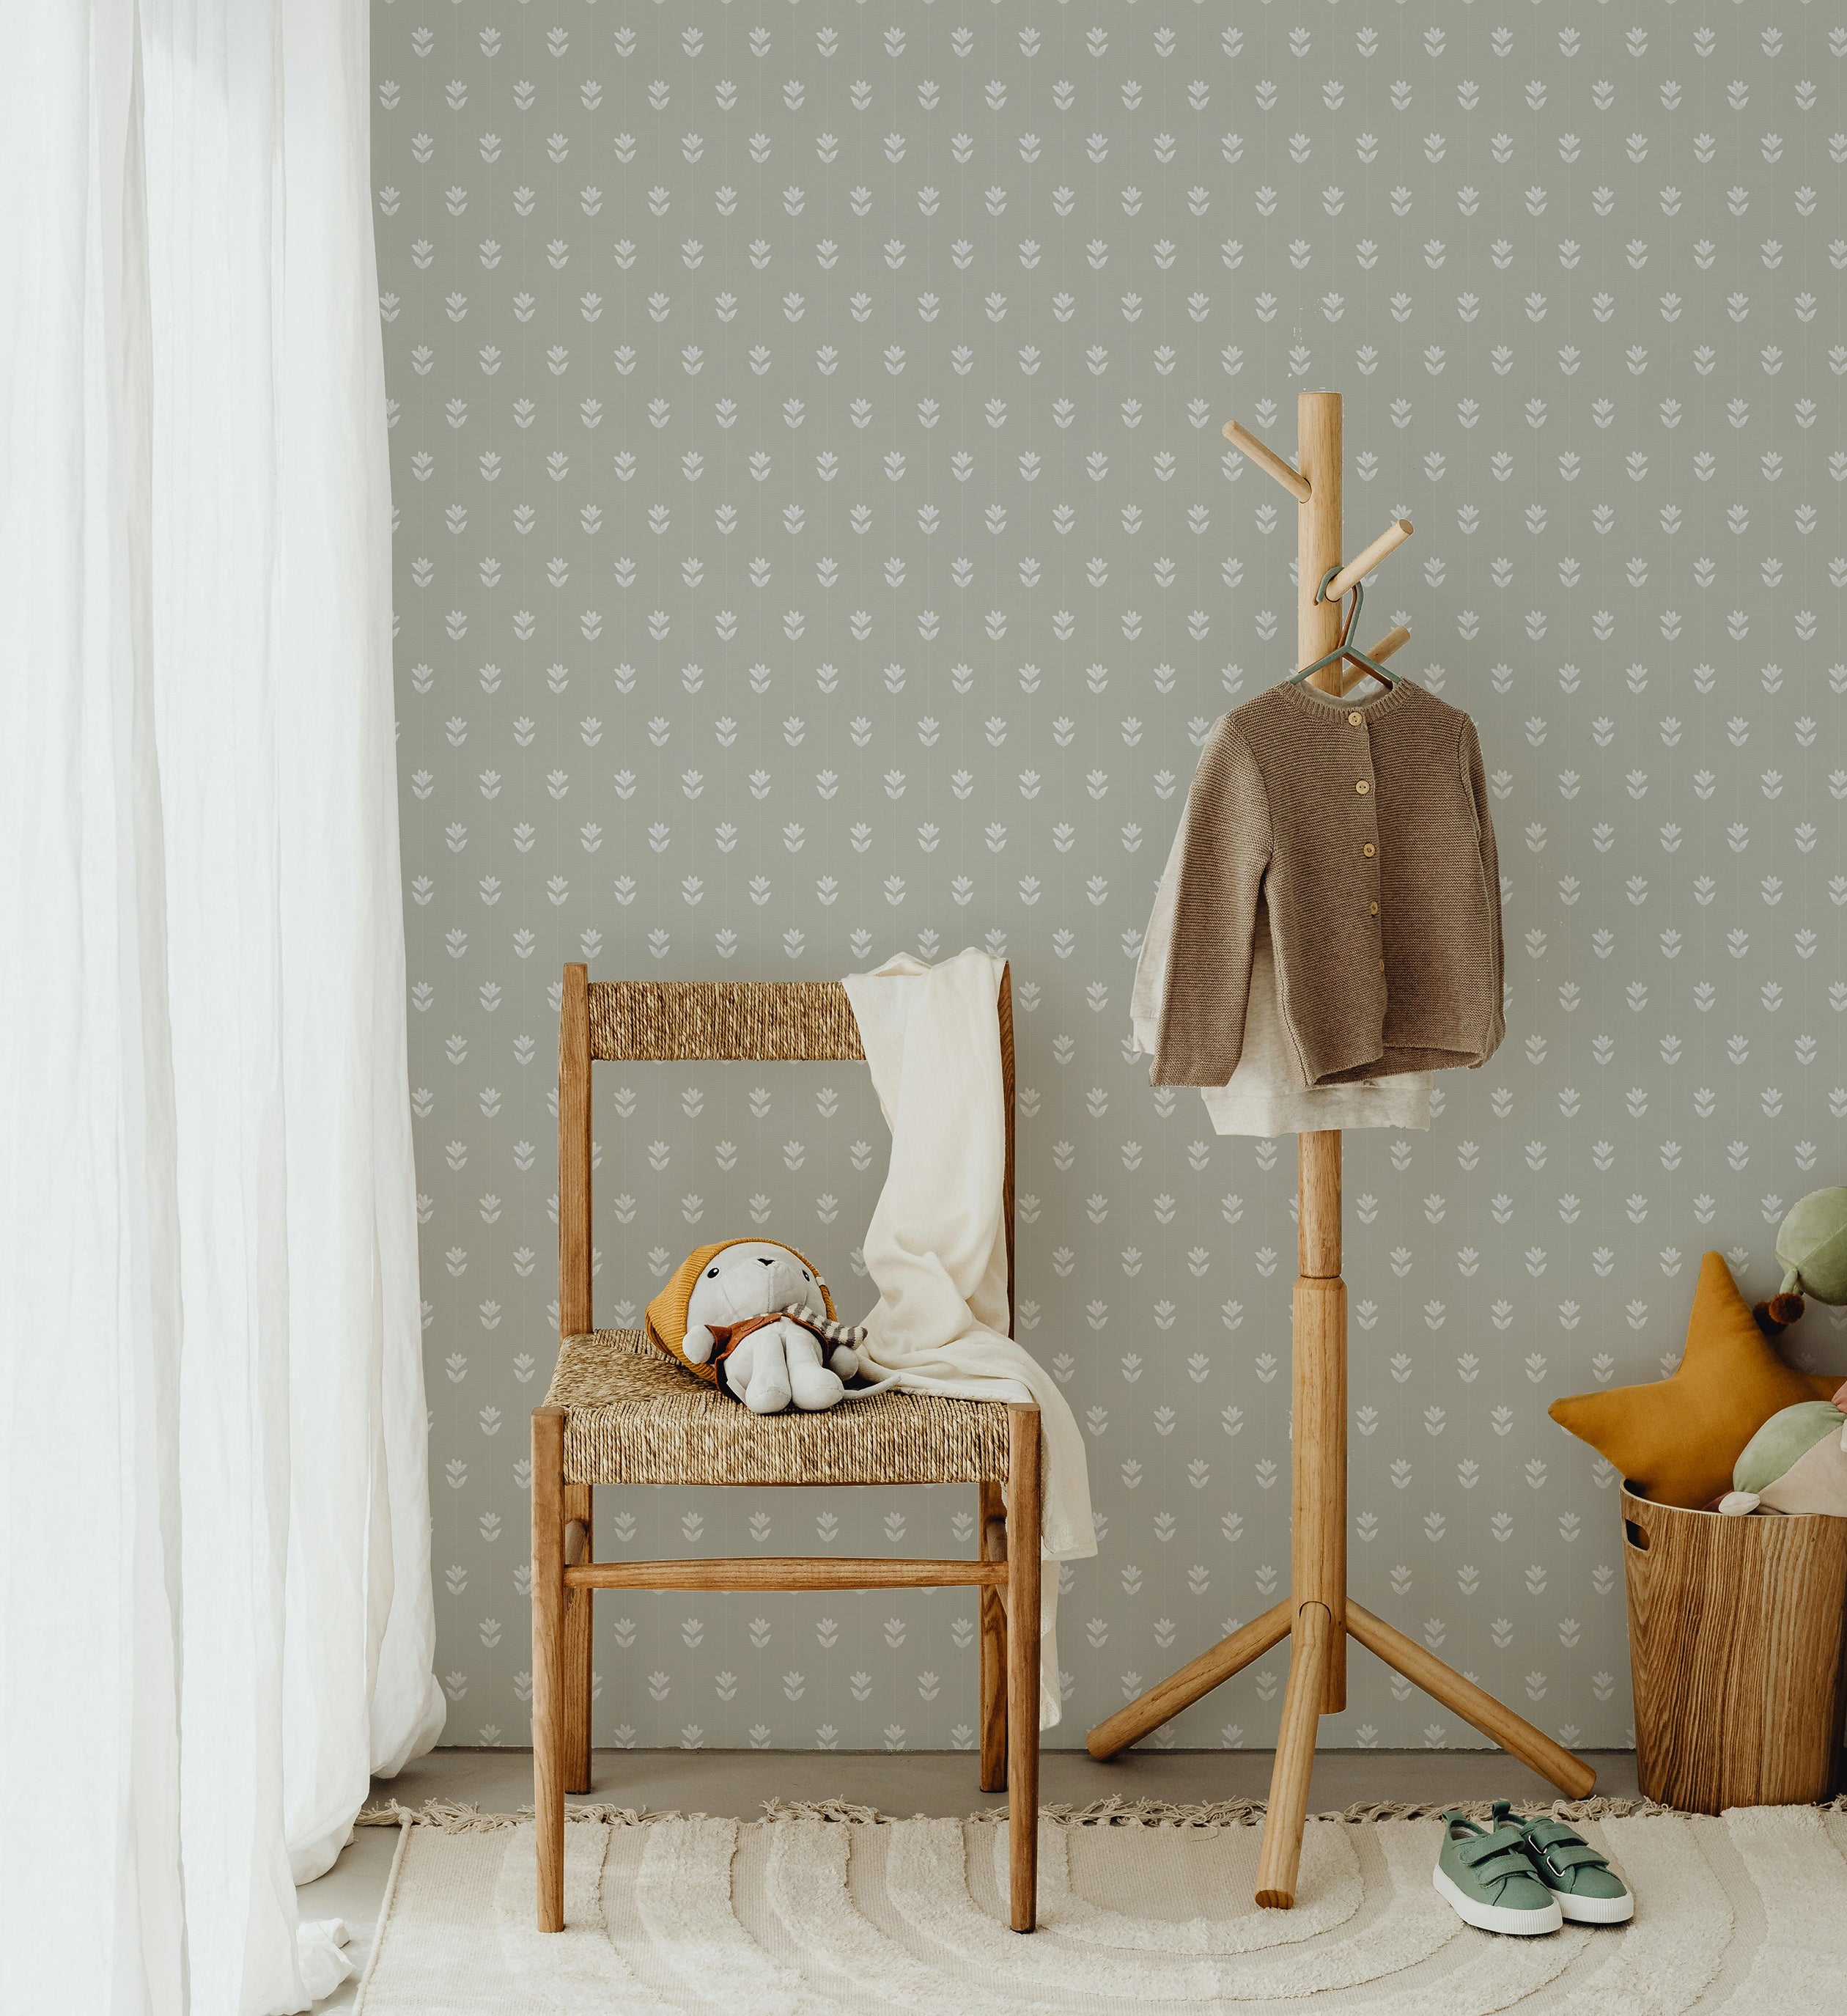 A children's corner featuring a wooden chair with a toy, a coat rack with a sweater, and a soft rug, all set against the Springtime Sprig Wallpaper. The wallpaper's gentle white sprig pattern on a green background creates a soothing and playful atmosphere.